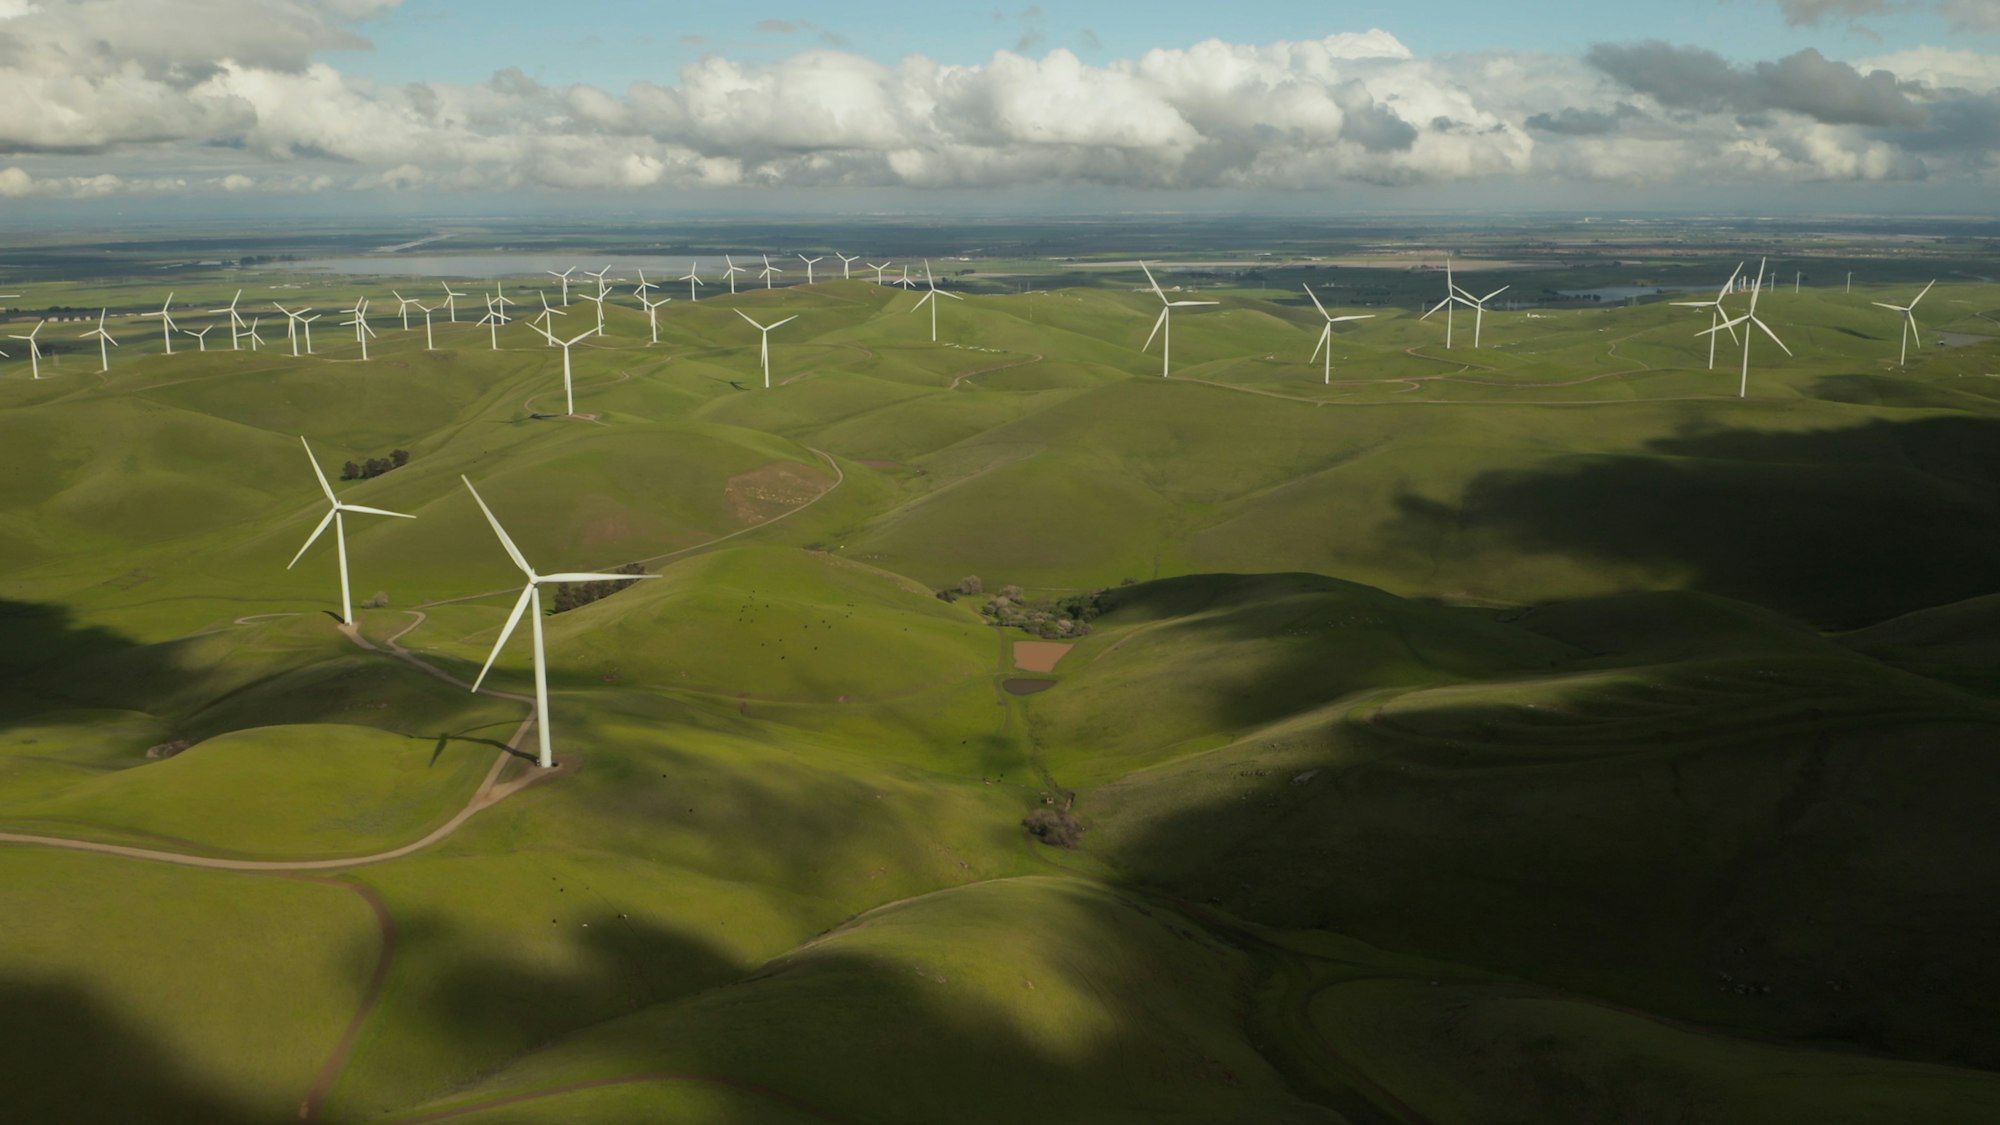 Rolling green hills, studded with cloud shadows, are covered in large white wind turbines.